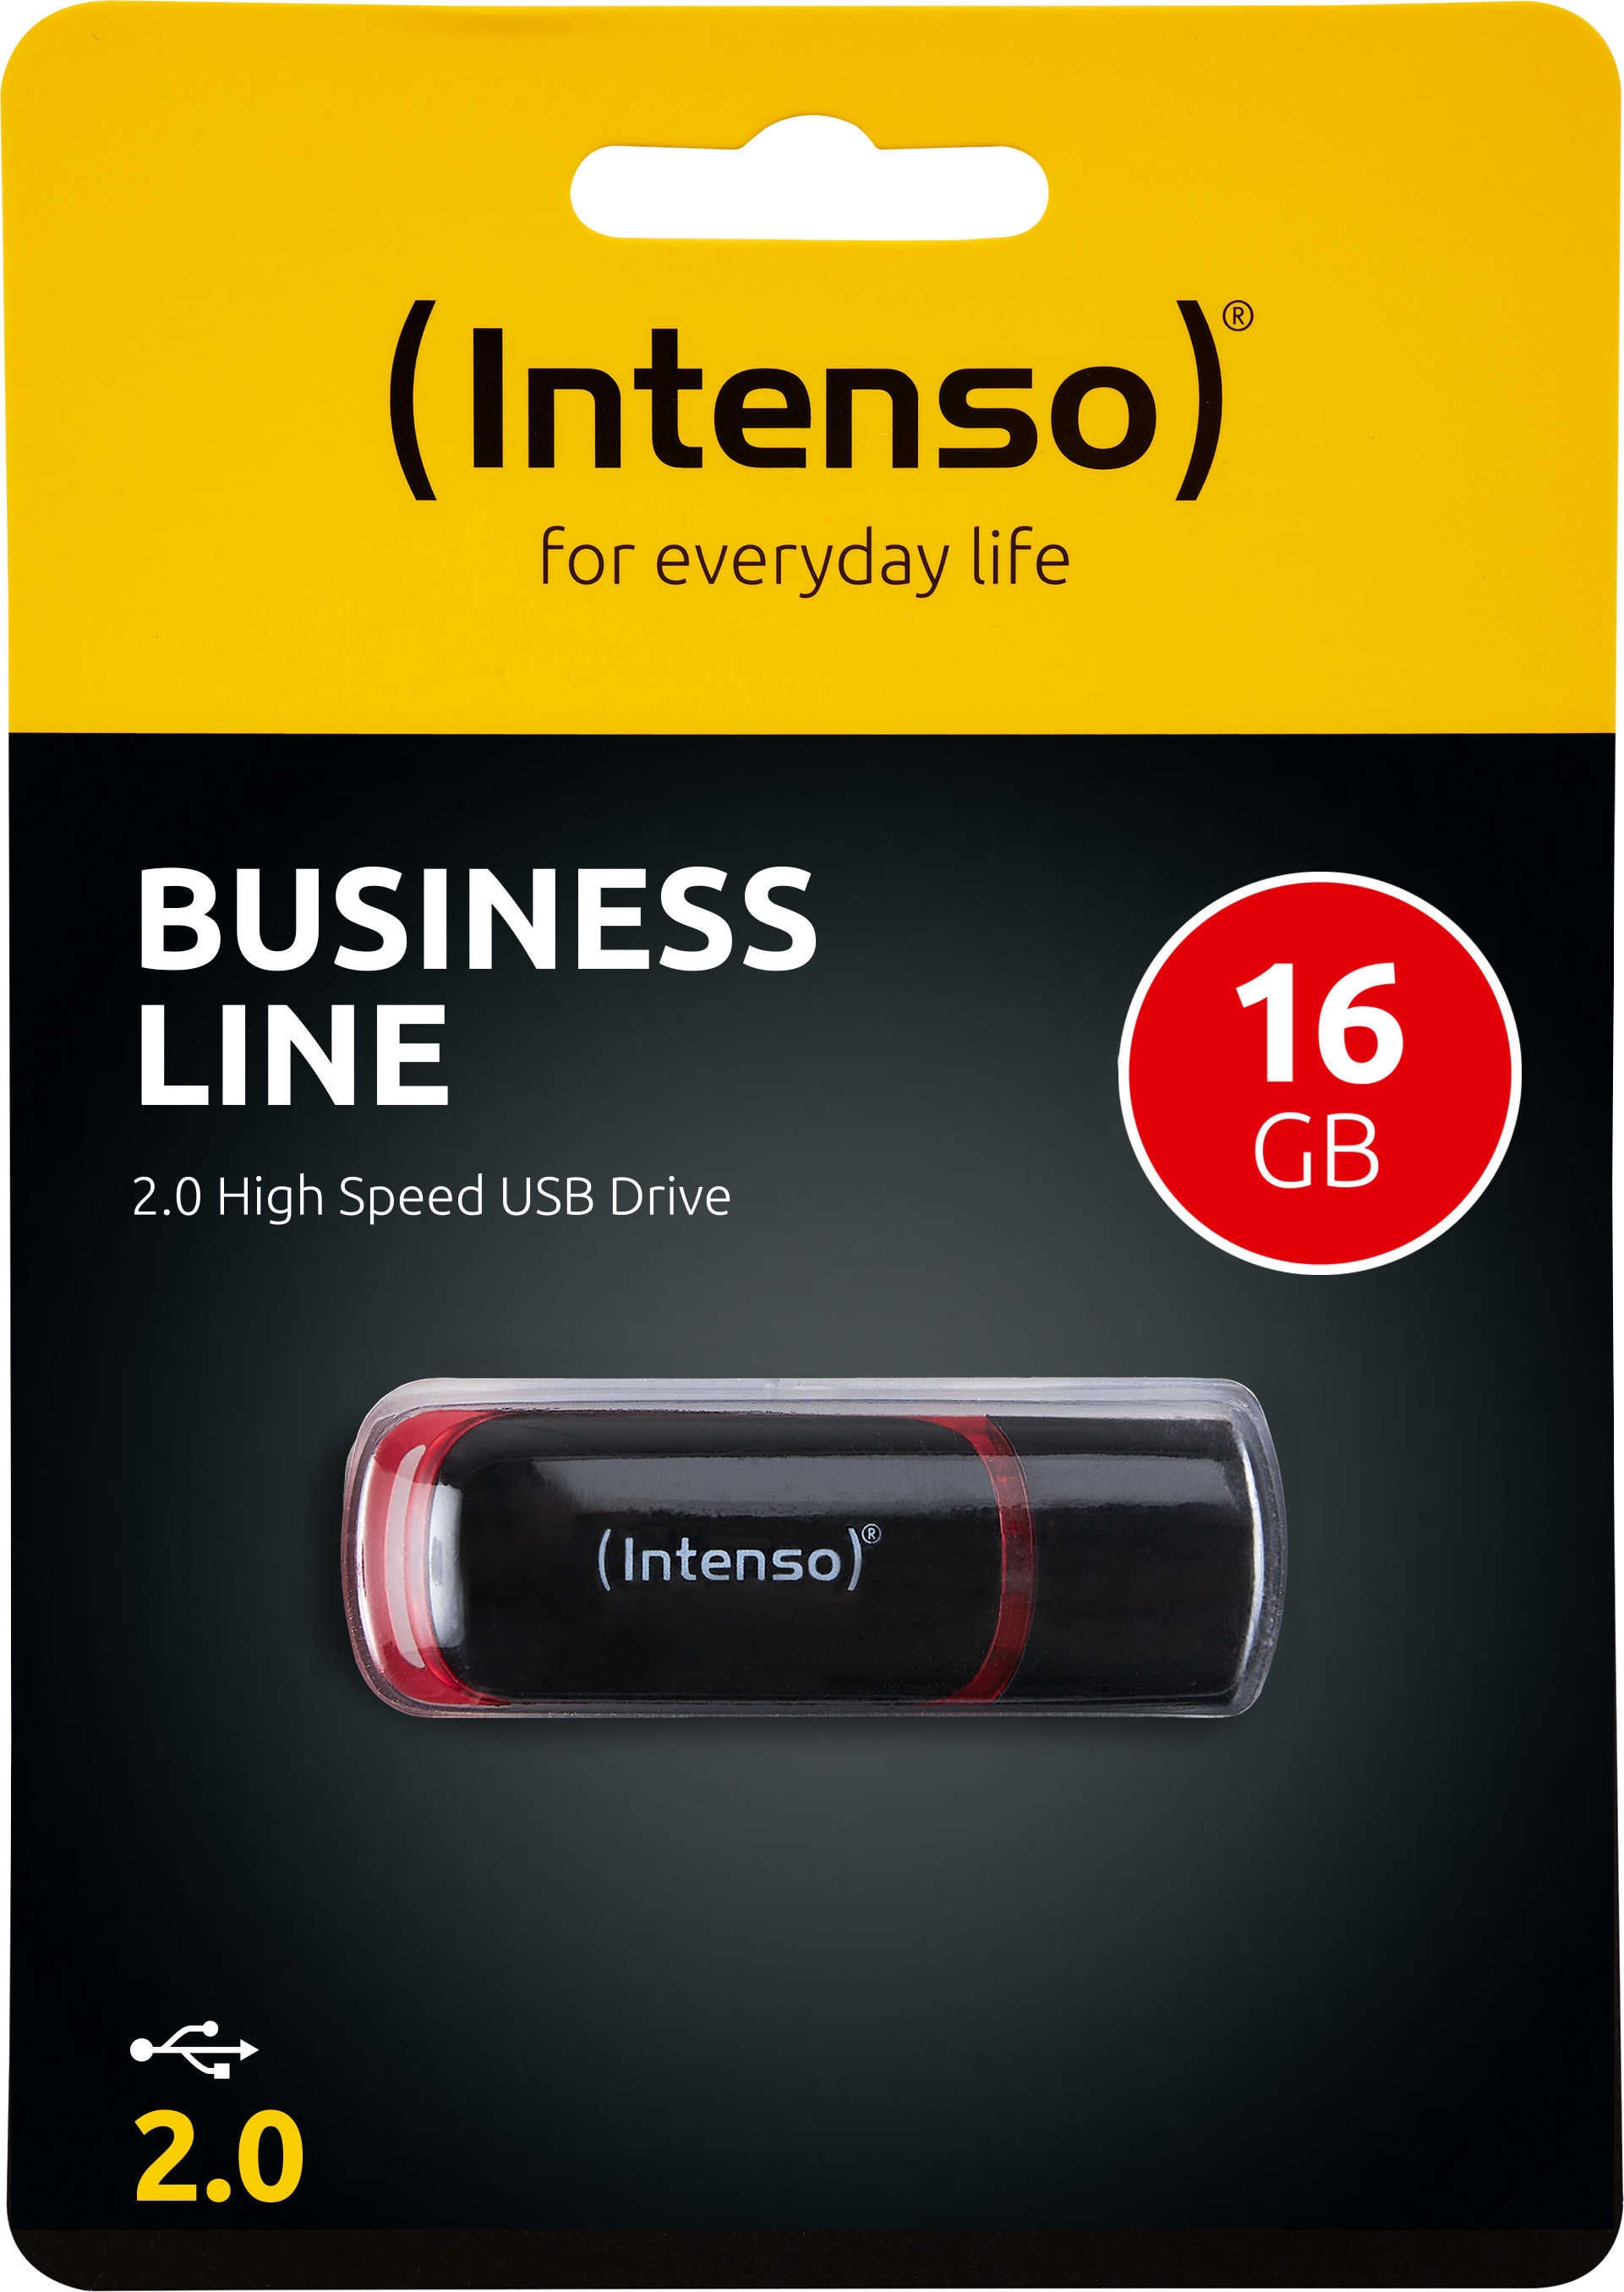 Intenso USB 2.0 Stick 16GB, Business Line, schwarz (R) 28MB/s, (W) 6.5MB/s, Rectractable, Retail-Blister